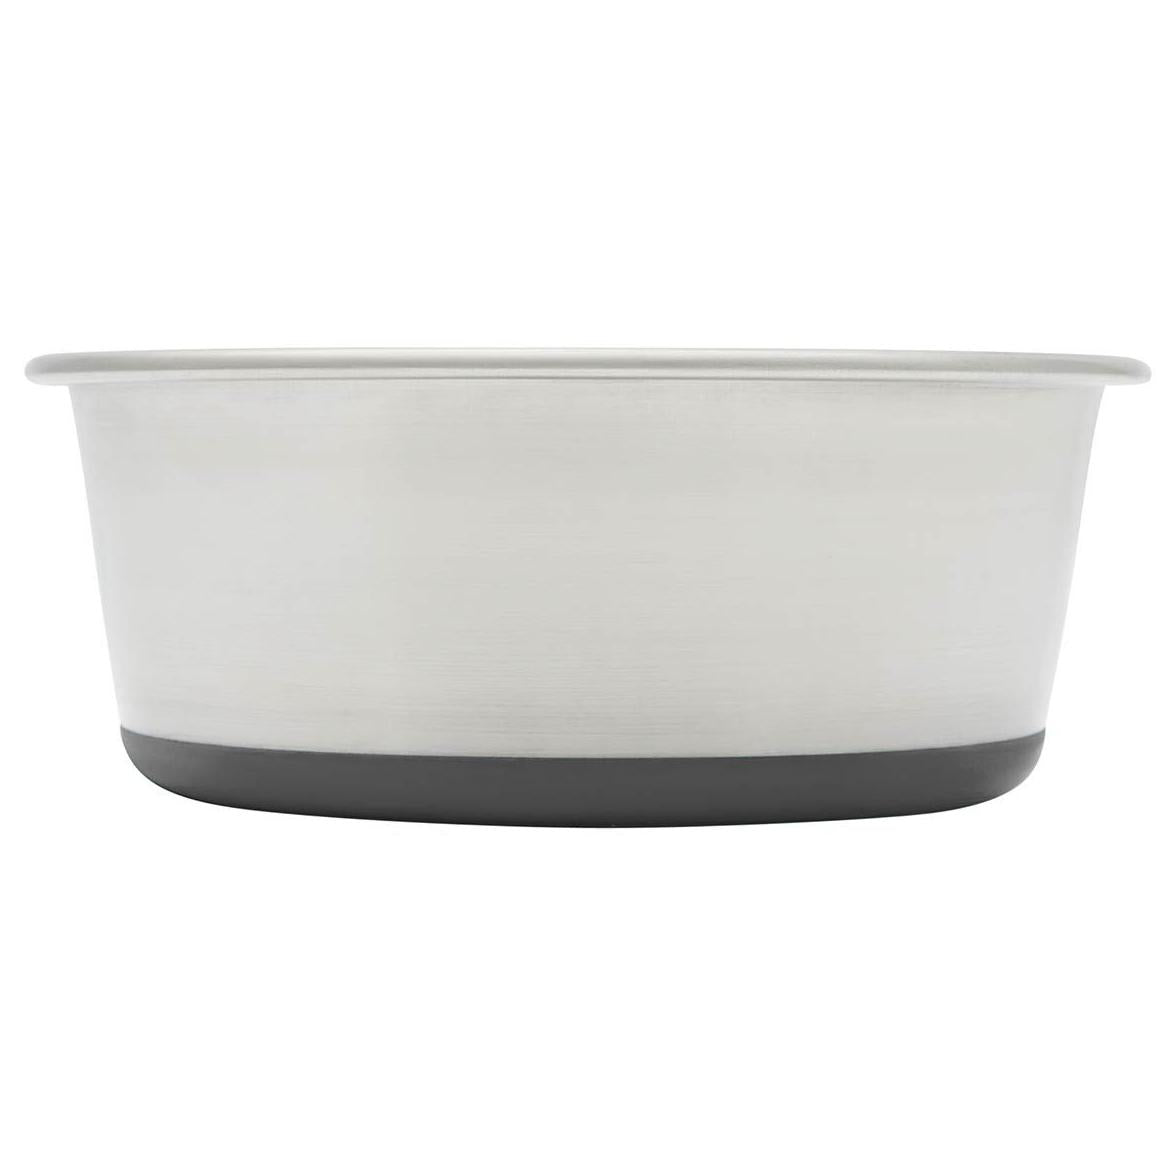 Lexi & Me Stainless Steel Bowl (100000022251) [Charcoal]